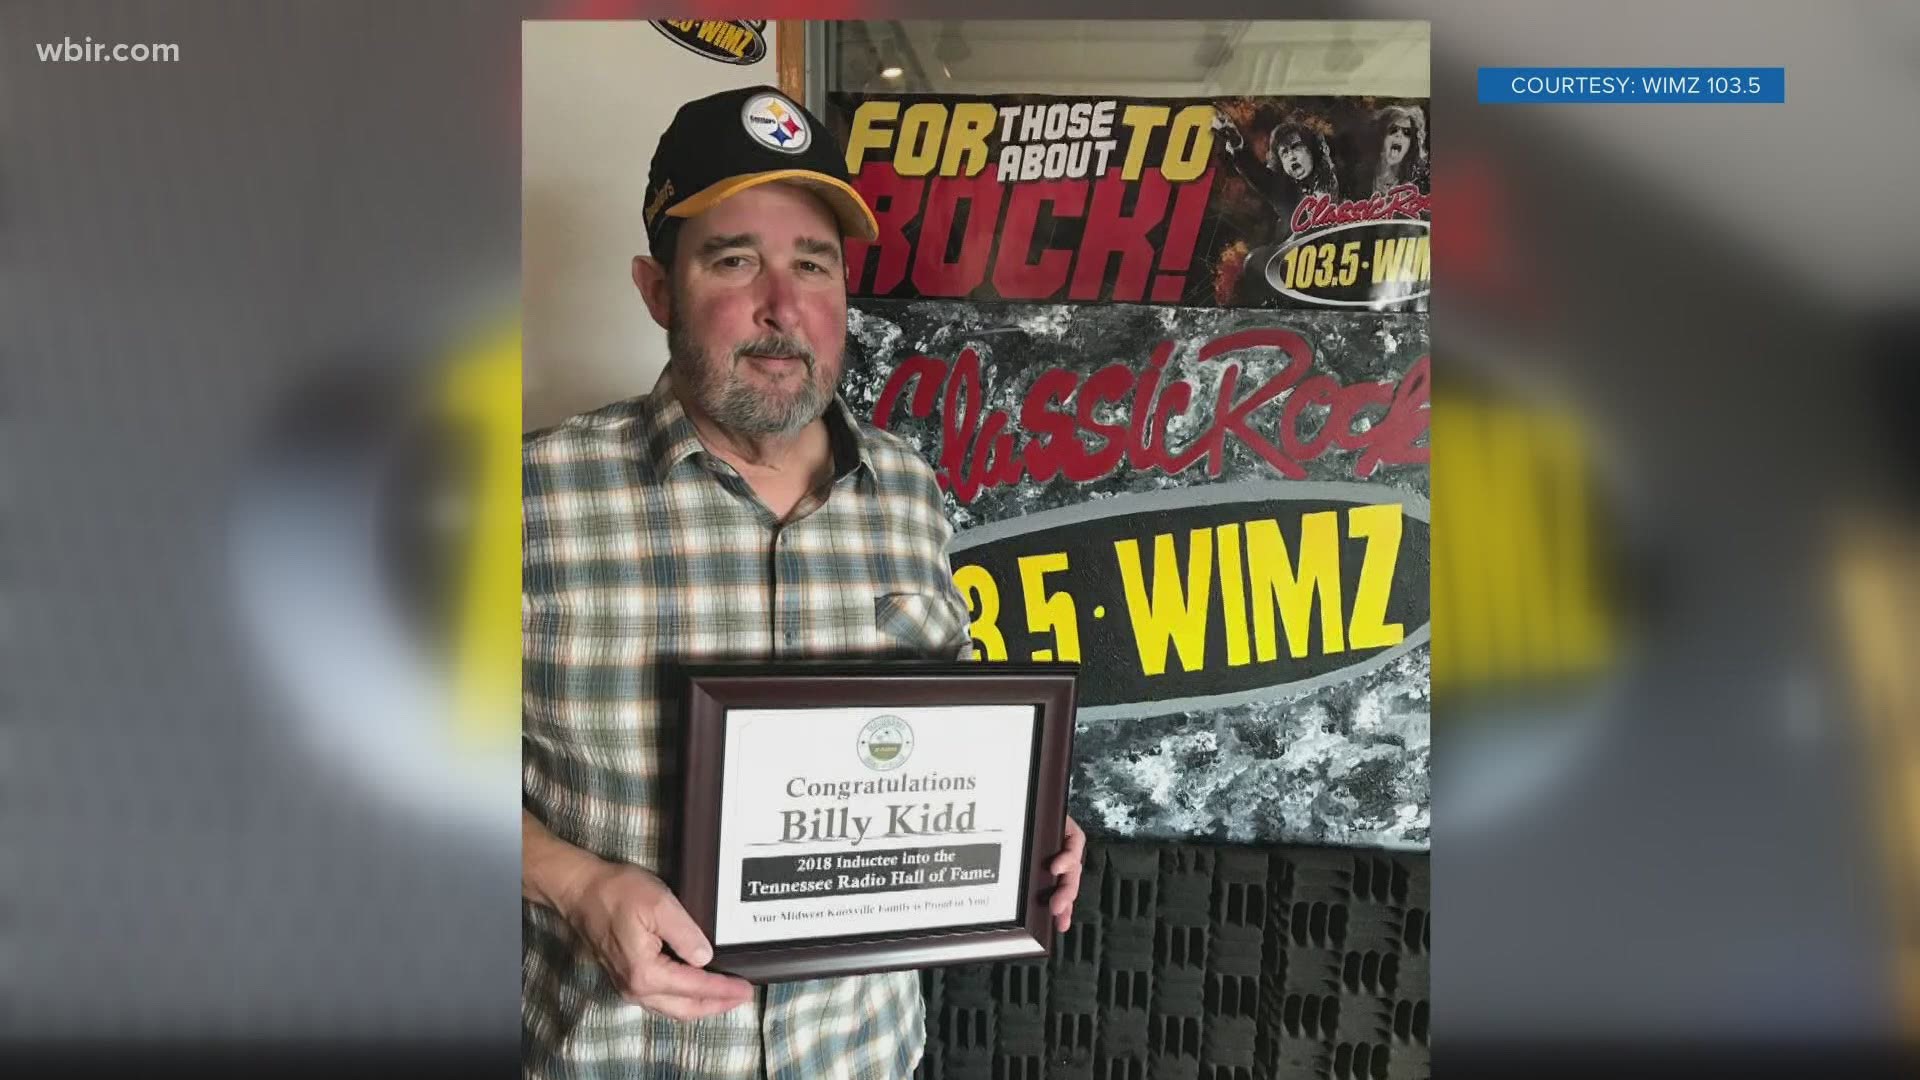 Billy Kidd has been on WIMZ 103.5 in Knoxville for decades. He died on Wednesday and friends and co-workers are remembering his amazing humor and big heart.